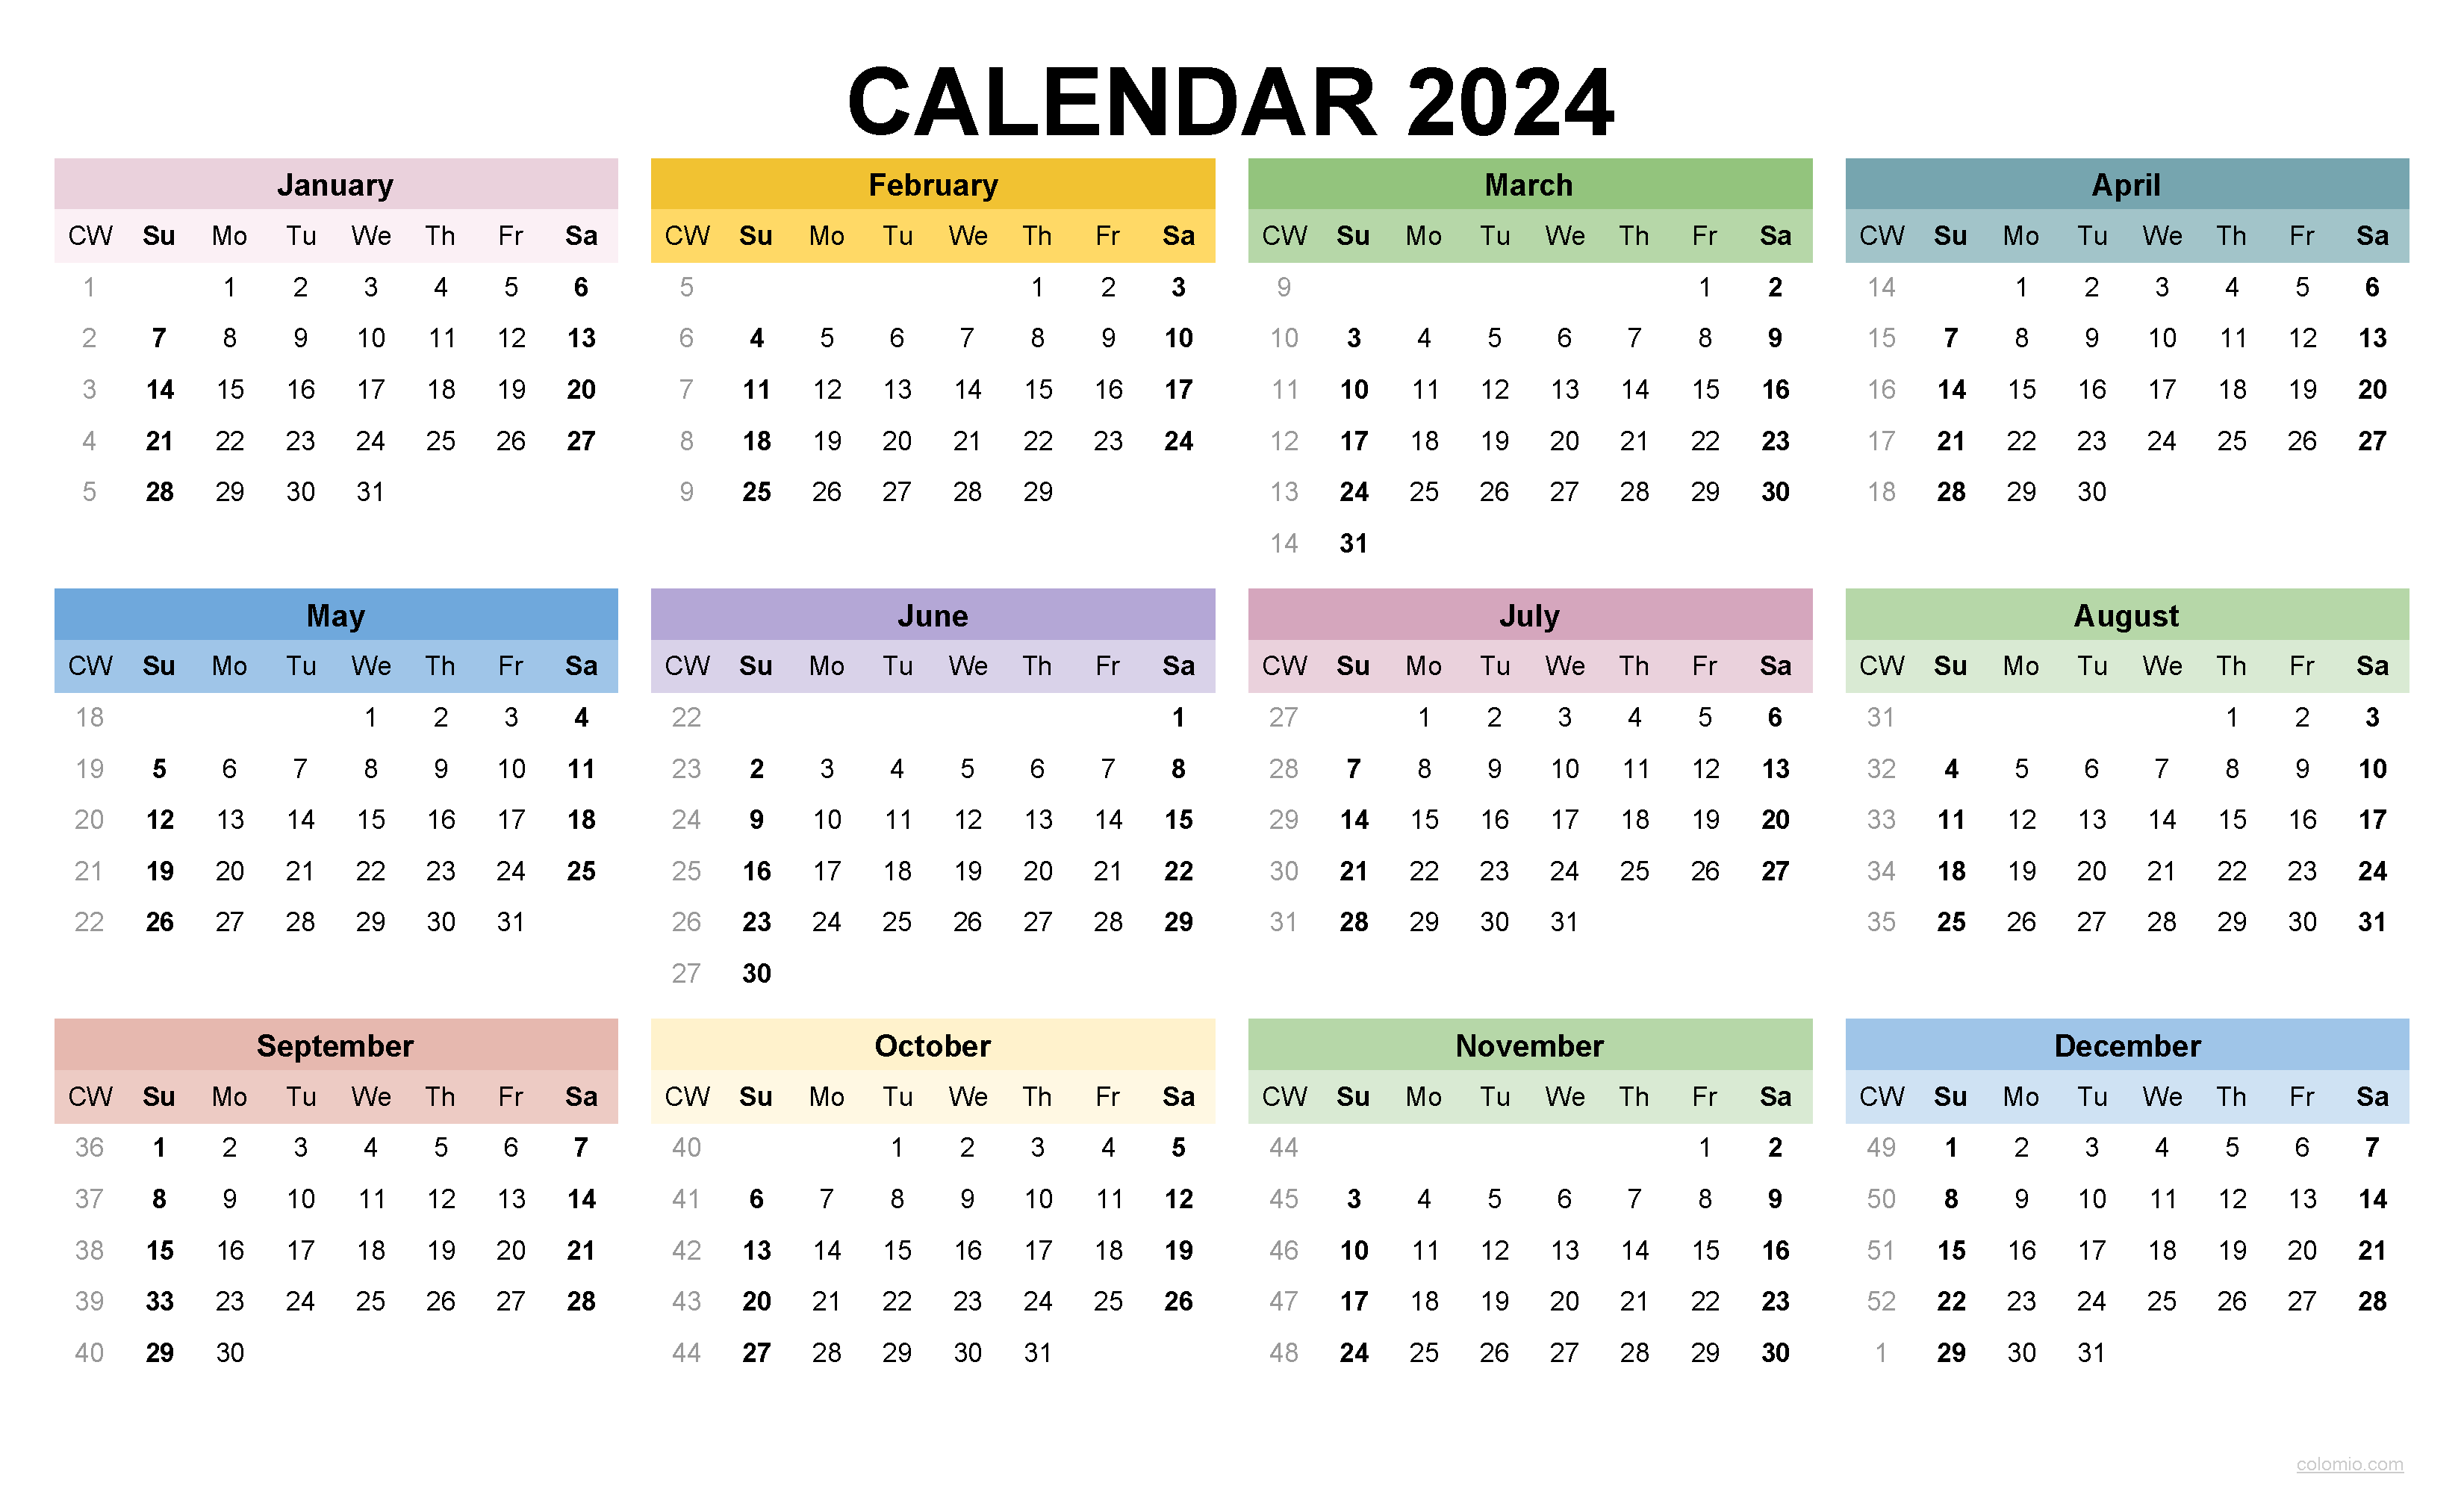 2024 Calendar Printable, ✓ Pdf, Excel And Image File - Free intended for Free Printable Calendar 2024 Yearly Pdf